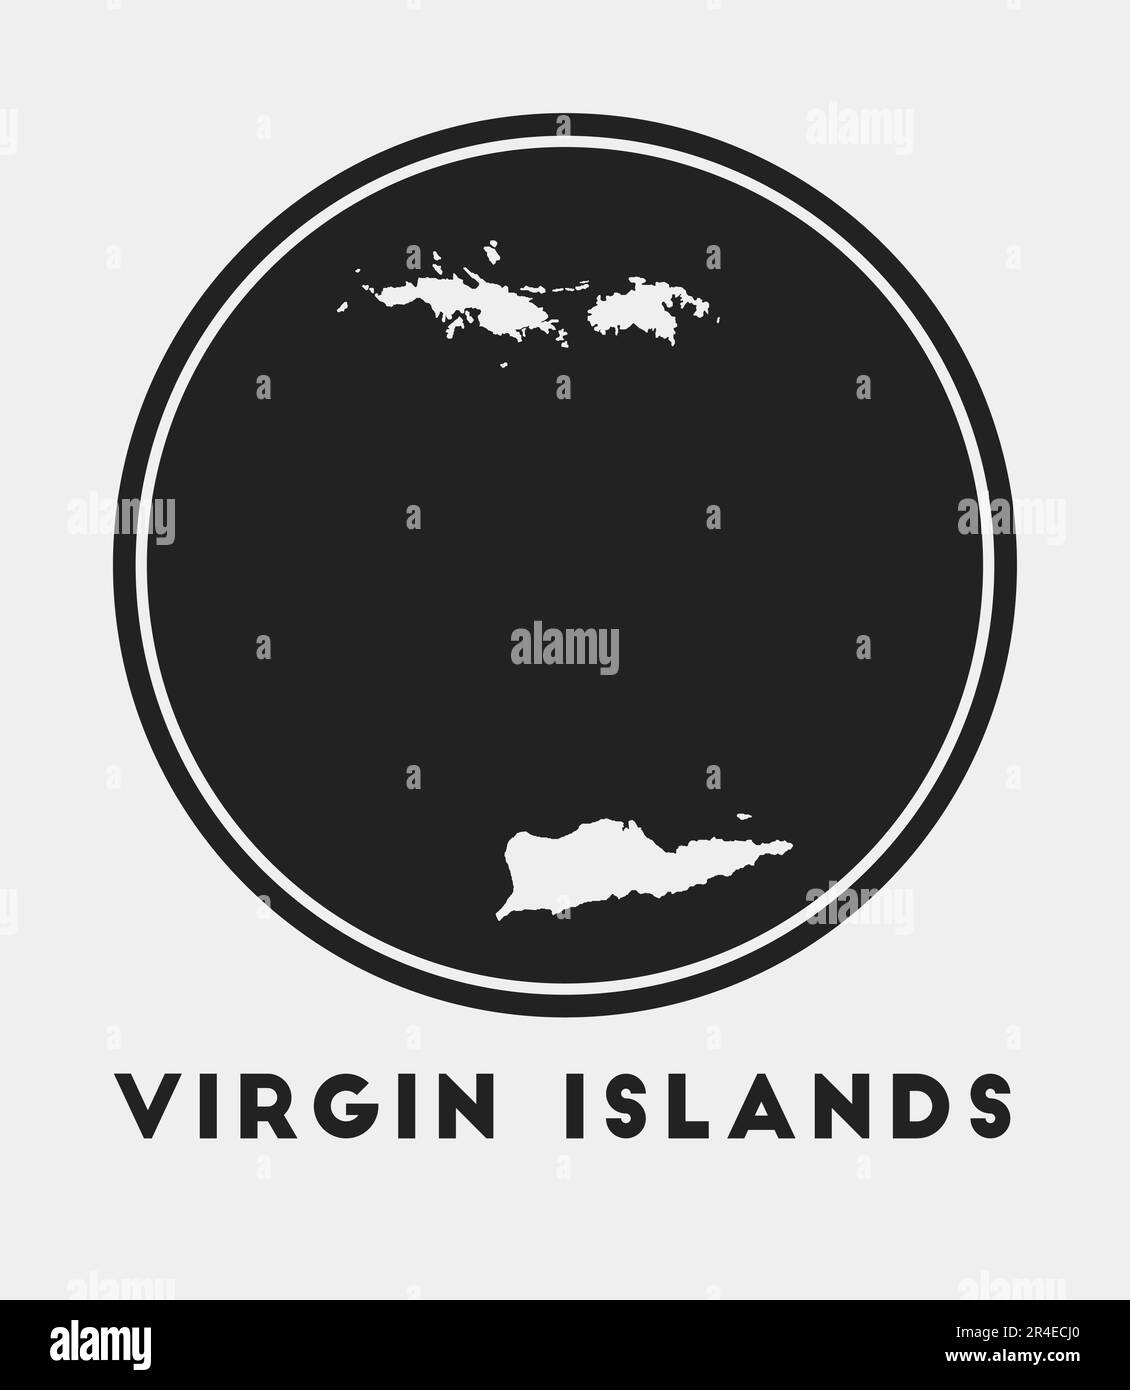 Virgin Islands icon. Round logo with island map and title. Stylish ...